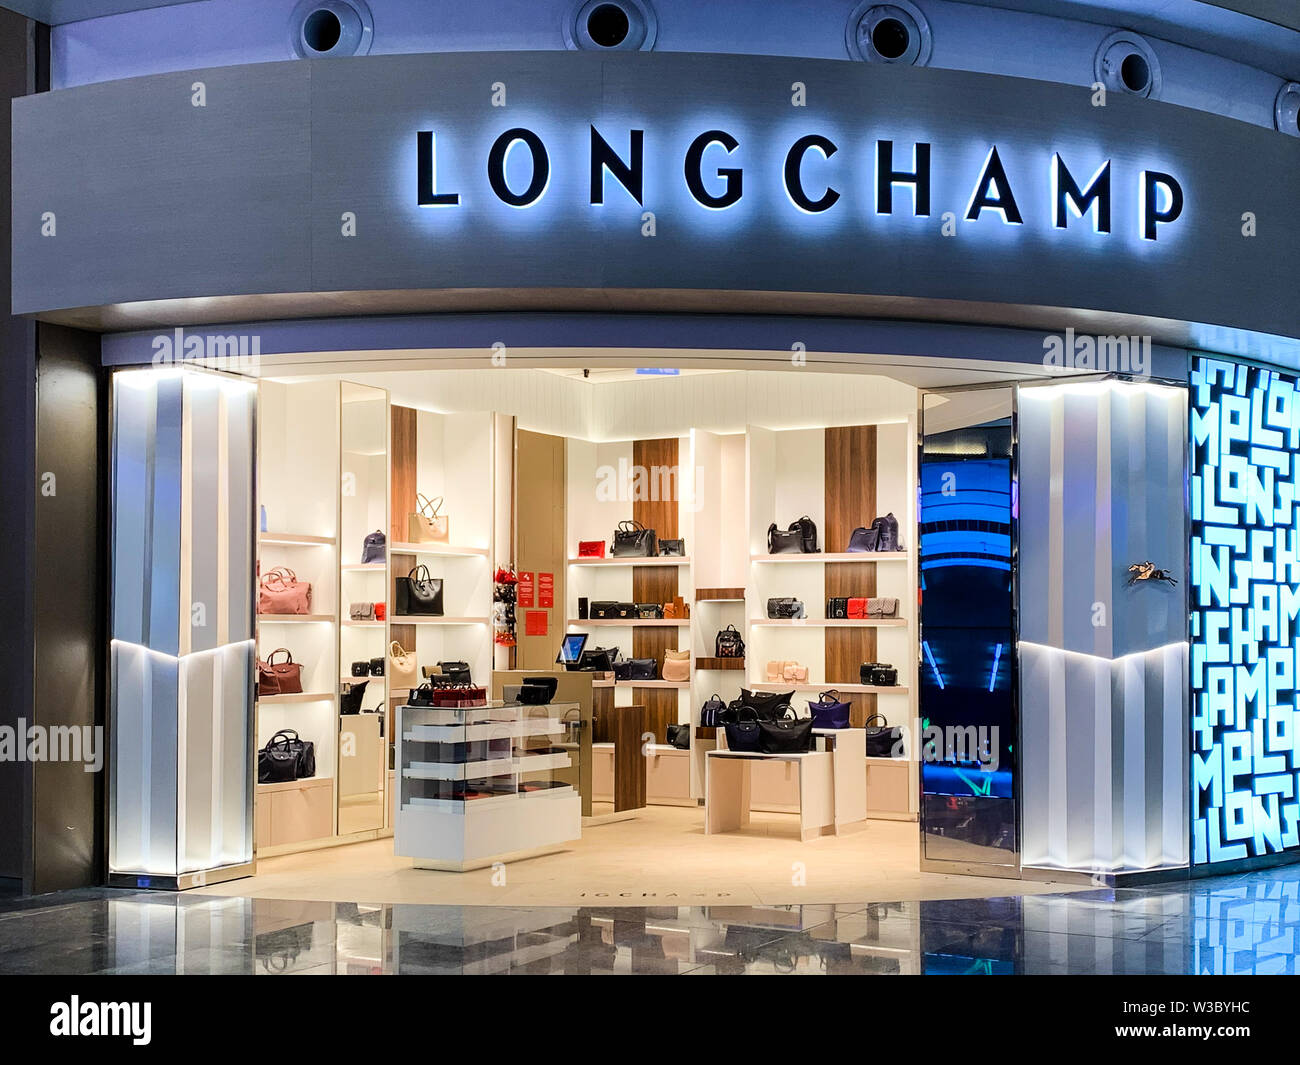 Longchamp shop in a mall. Longchamp is a French luxury leather goods company, selling fashion accessories and ready to wear bags. Istanbul/ Turkey - A Stock Photo